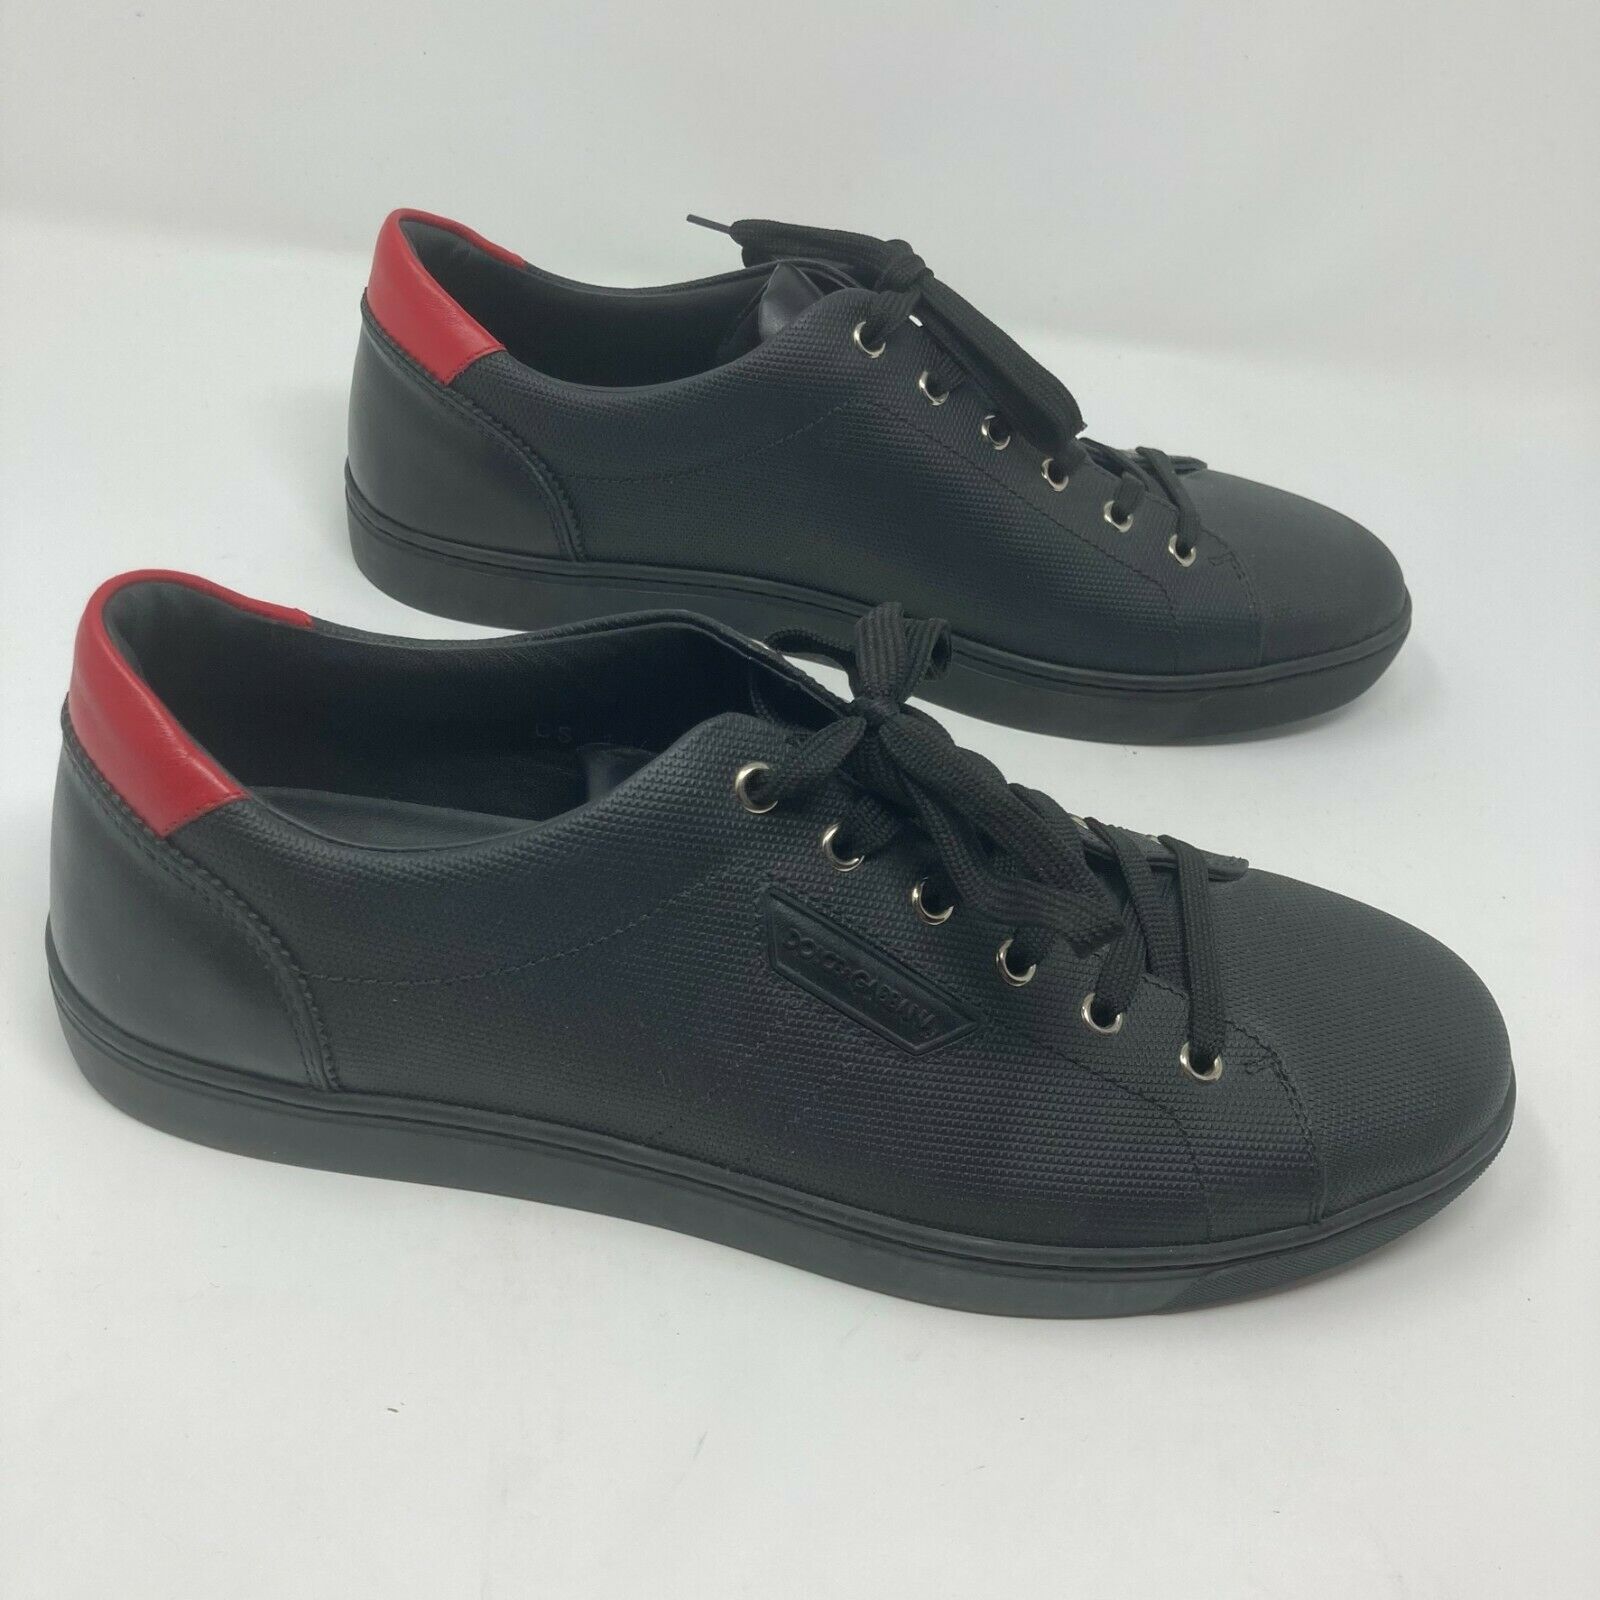 Dolce & Gabbana Classic Low Top Sneaker Shoes Black Red CS 1362 Size US 10